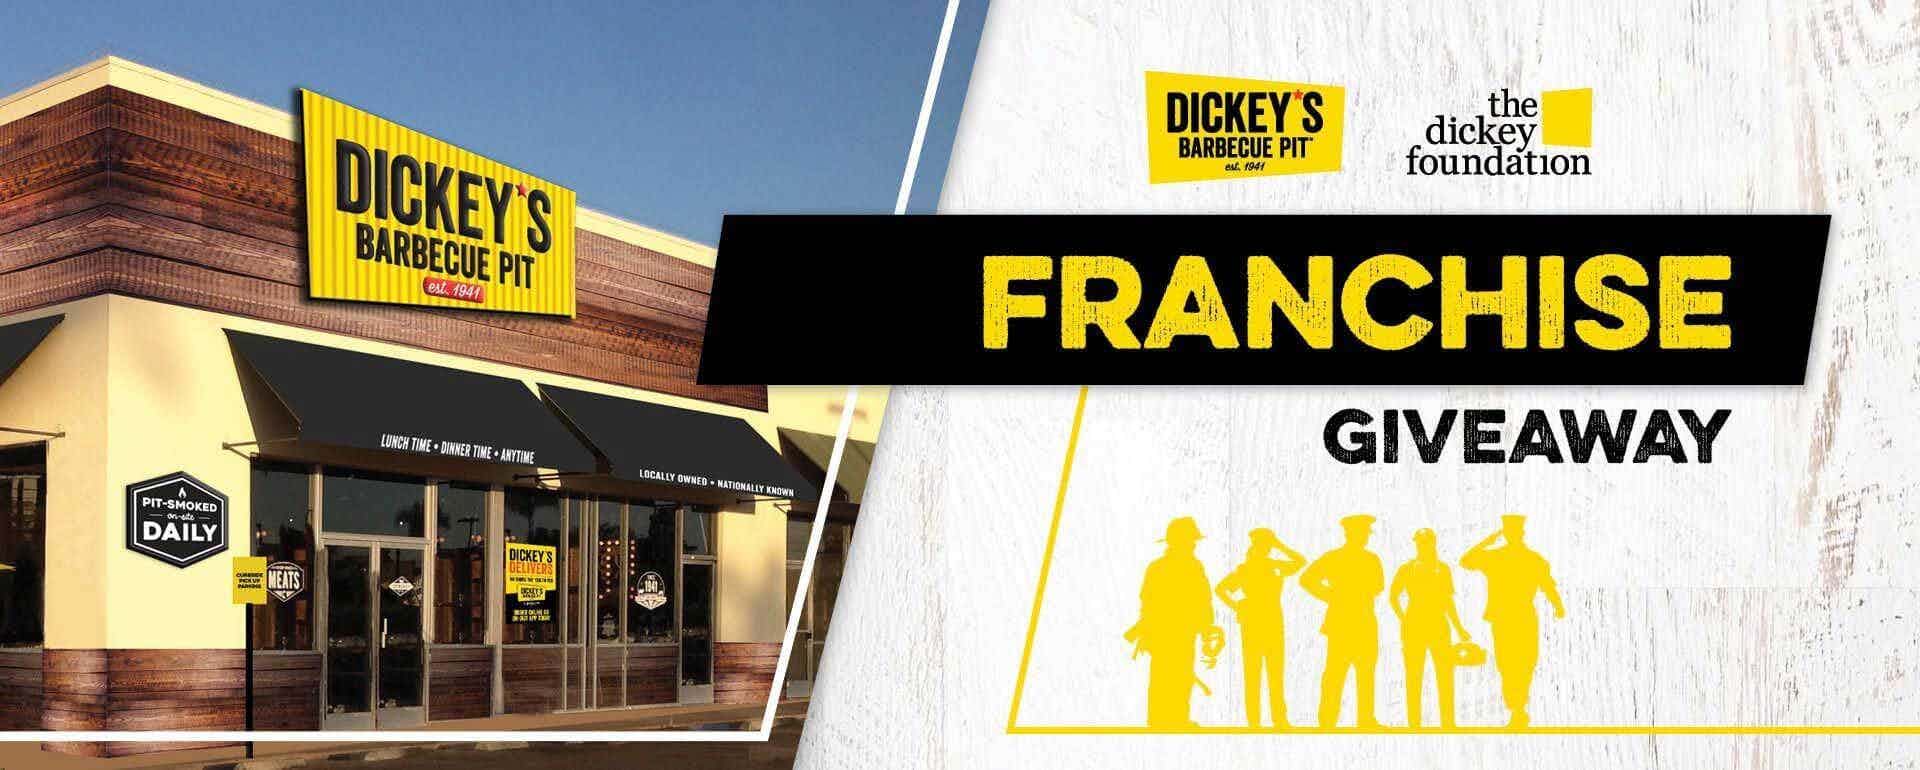 Franchise Fee Giveaway for Dickey's Barbecue Pit